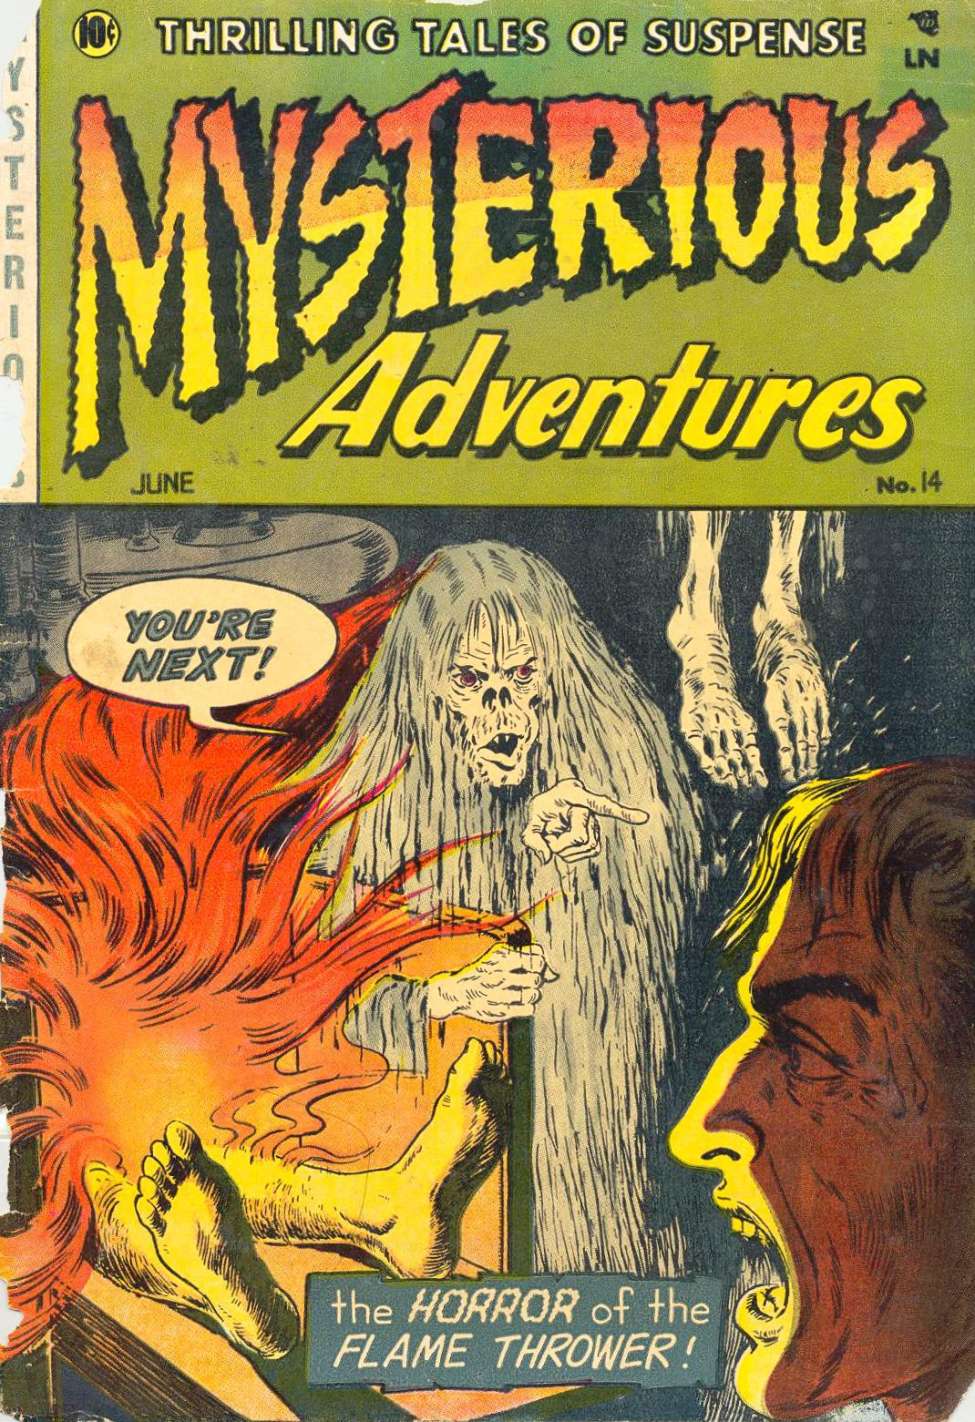 Book Cover For Mysterious Adventures 14